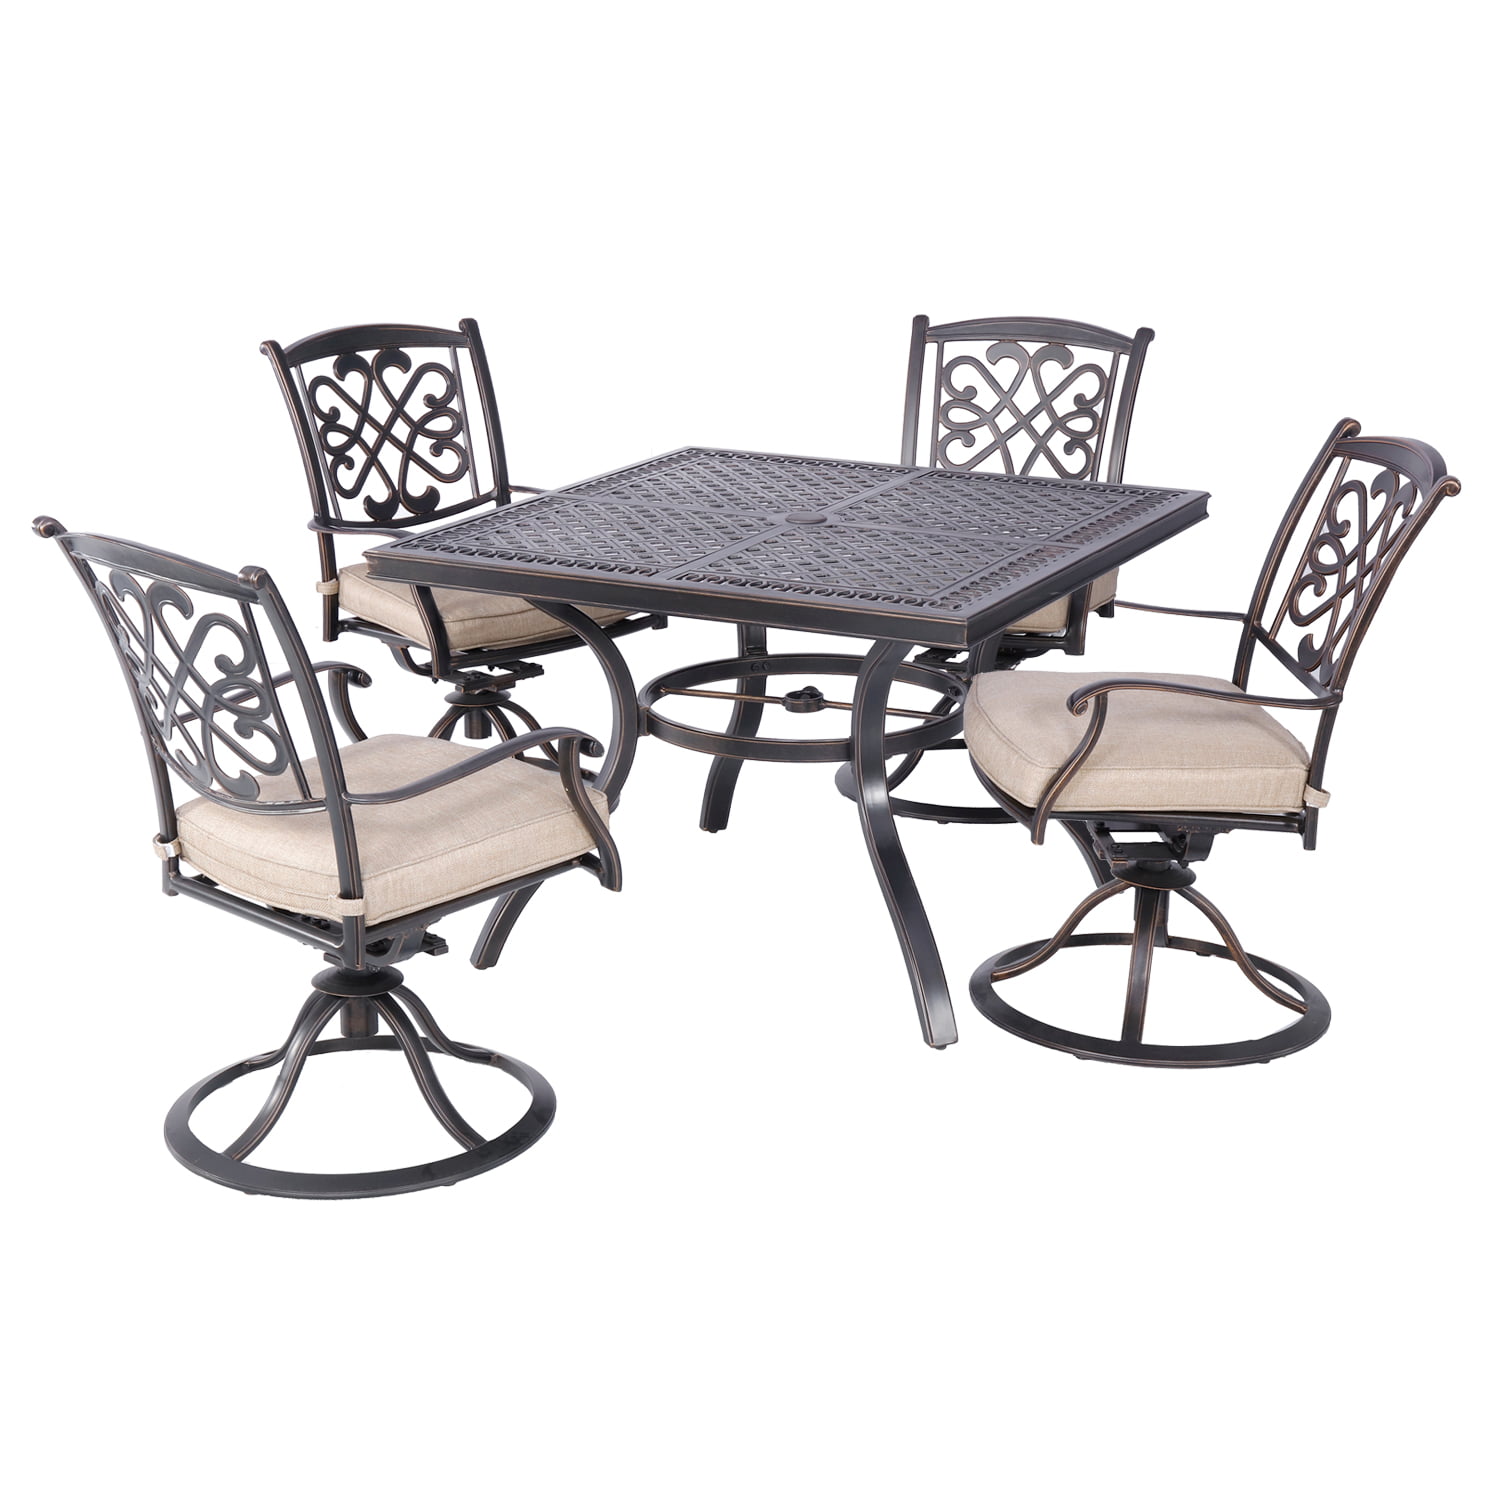 Outdoor Wicker Dining Set With Umbrella Hole Shop Style Selections Elliot Creek 7 Piece Patio